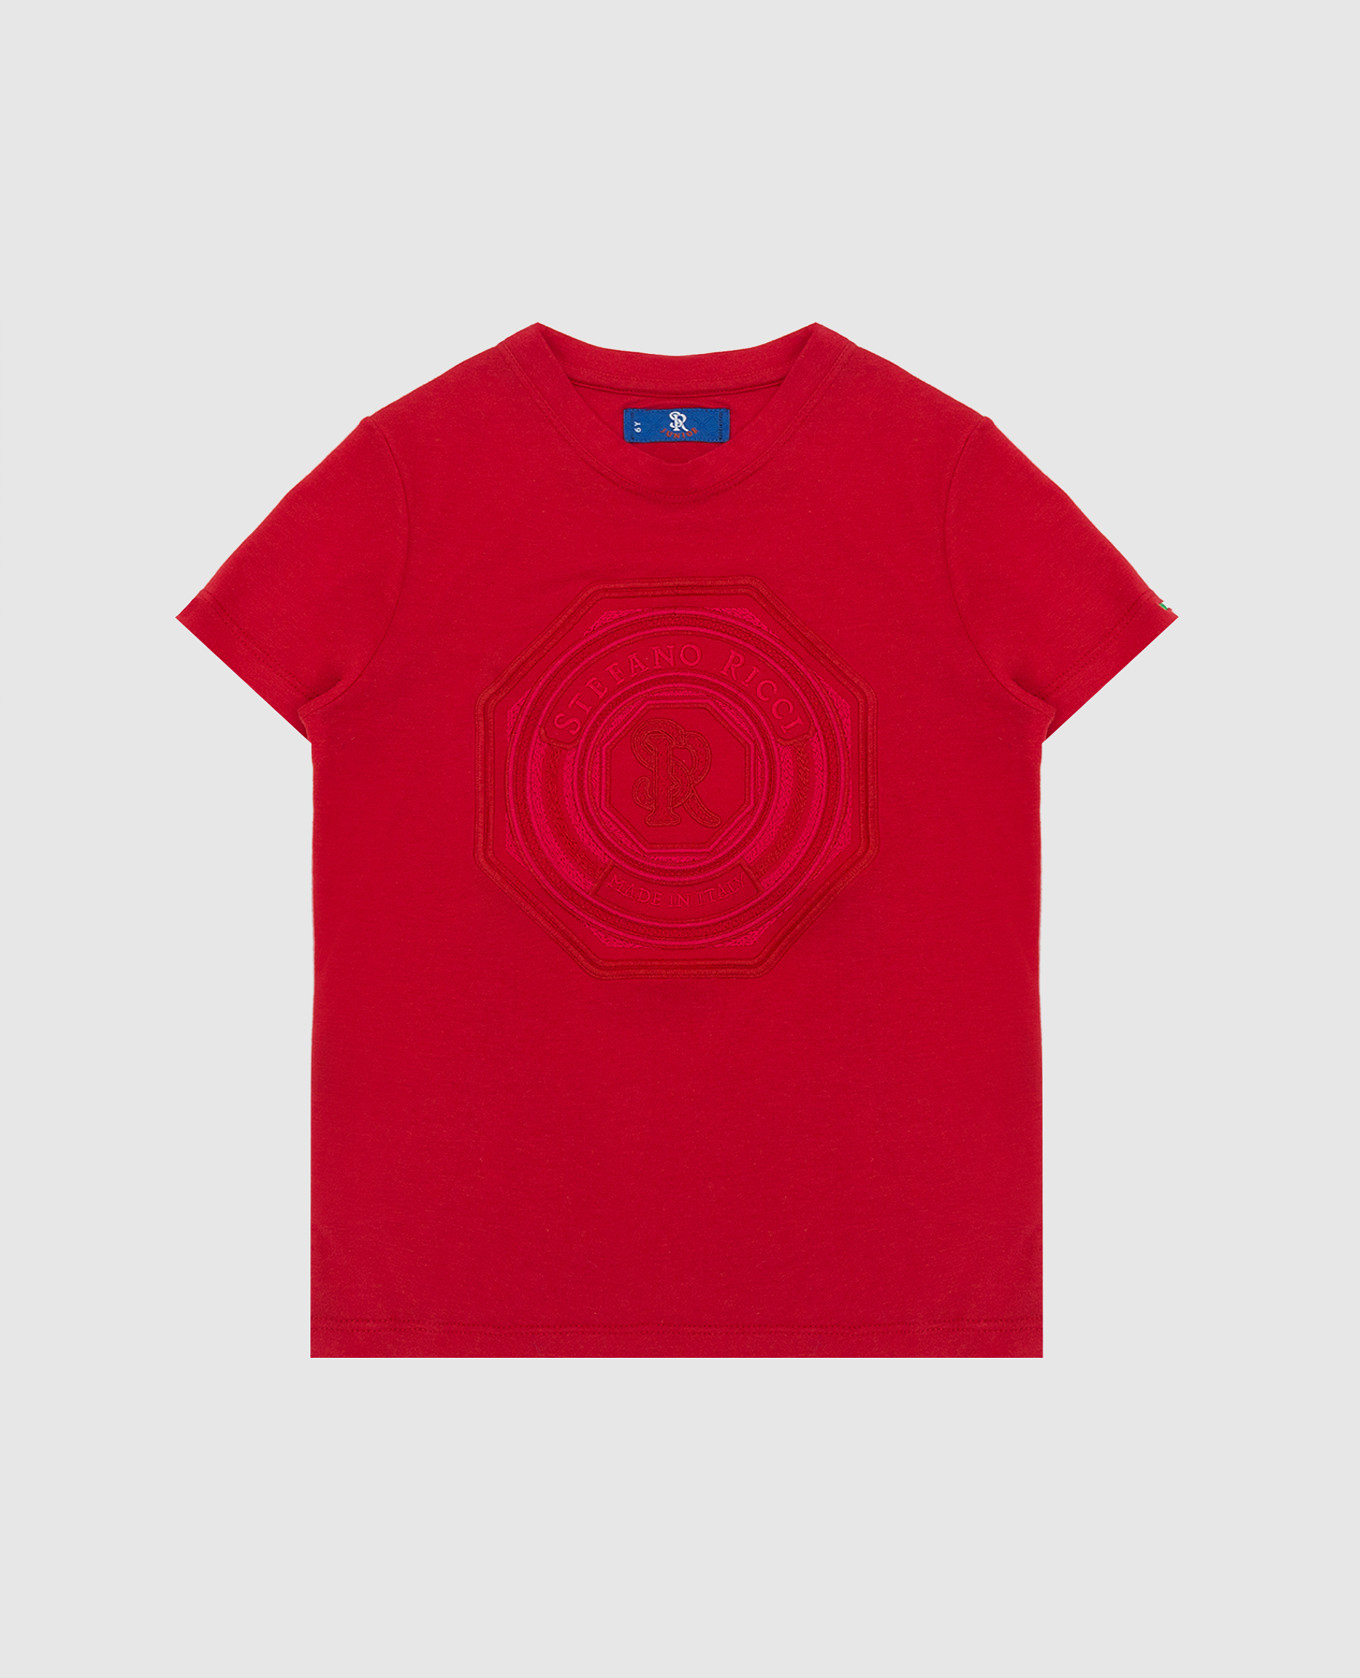 Children's red t-shirt with monogram embroidery